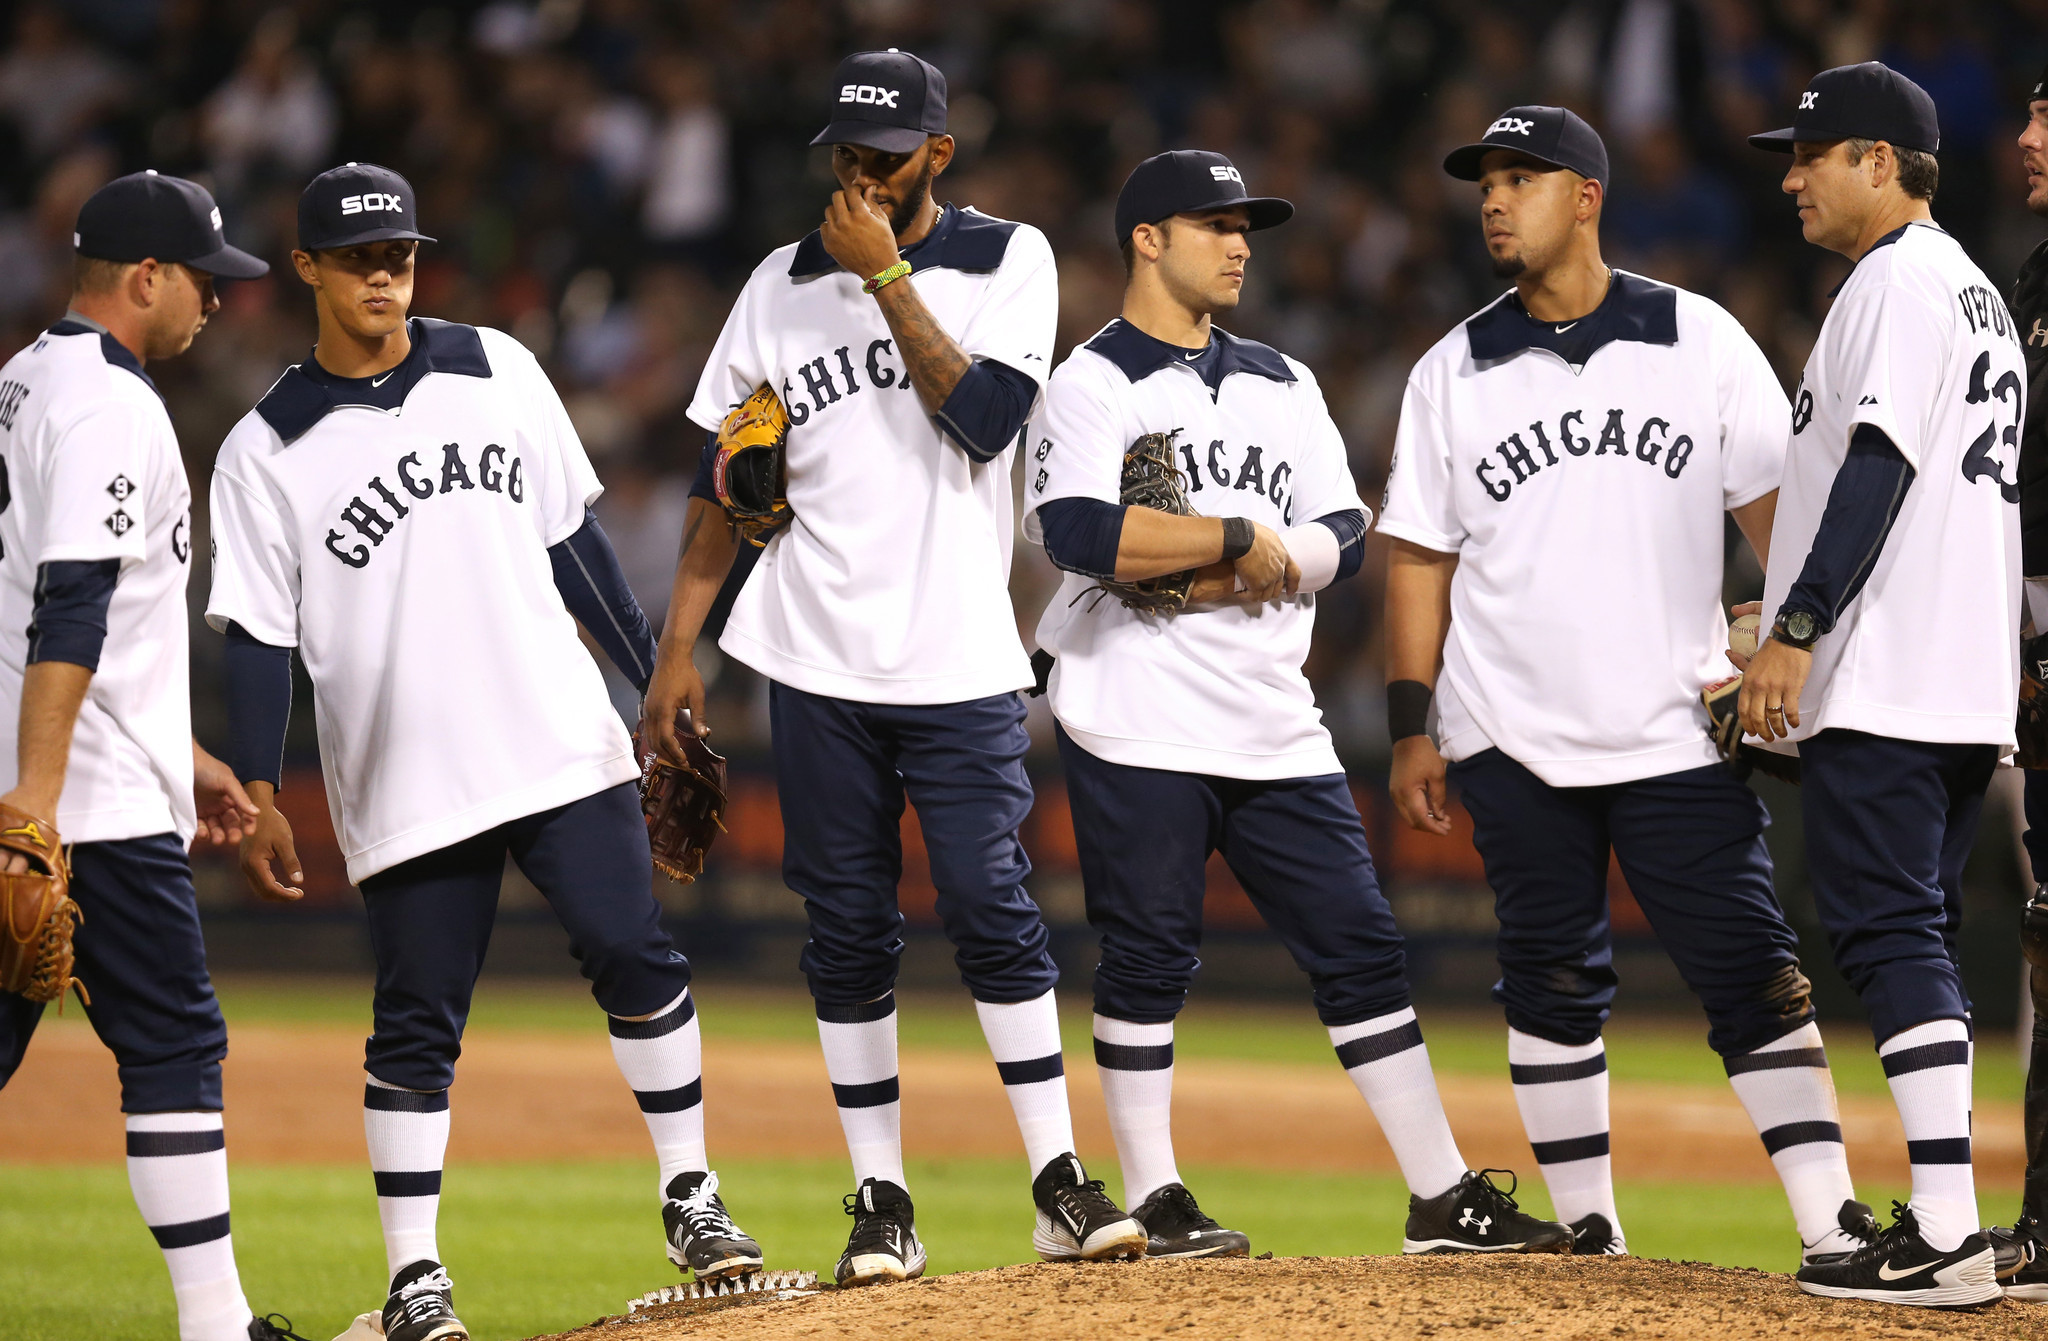 White Sox dress for success to top Mariners on Throwback Thursday